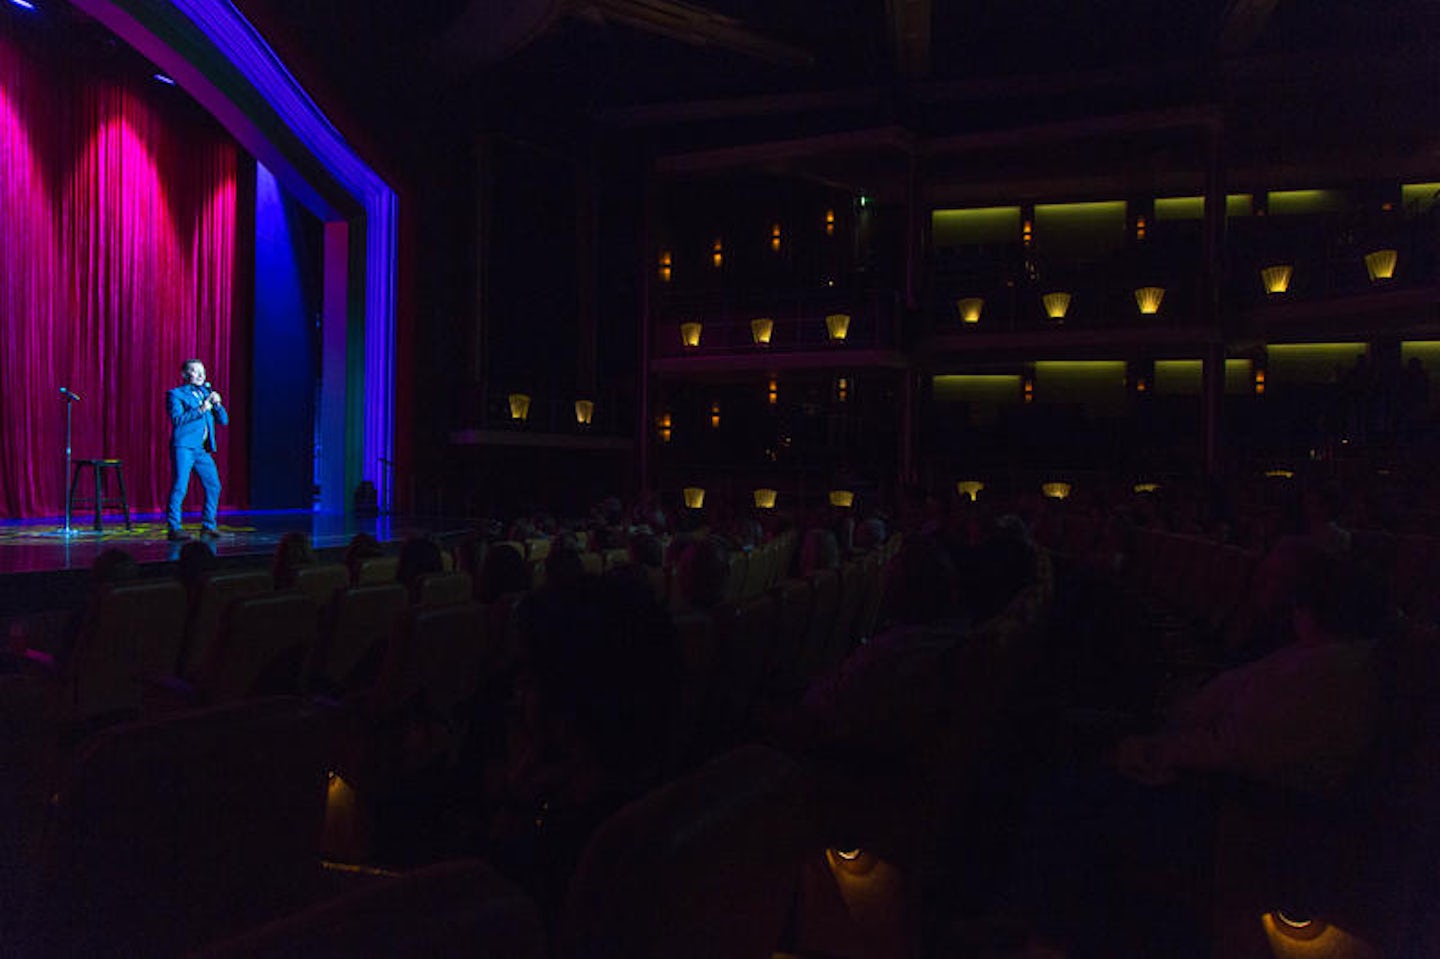 Comedy Show in the Royal Theater on Mariner of the Seas